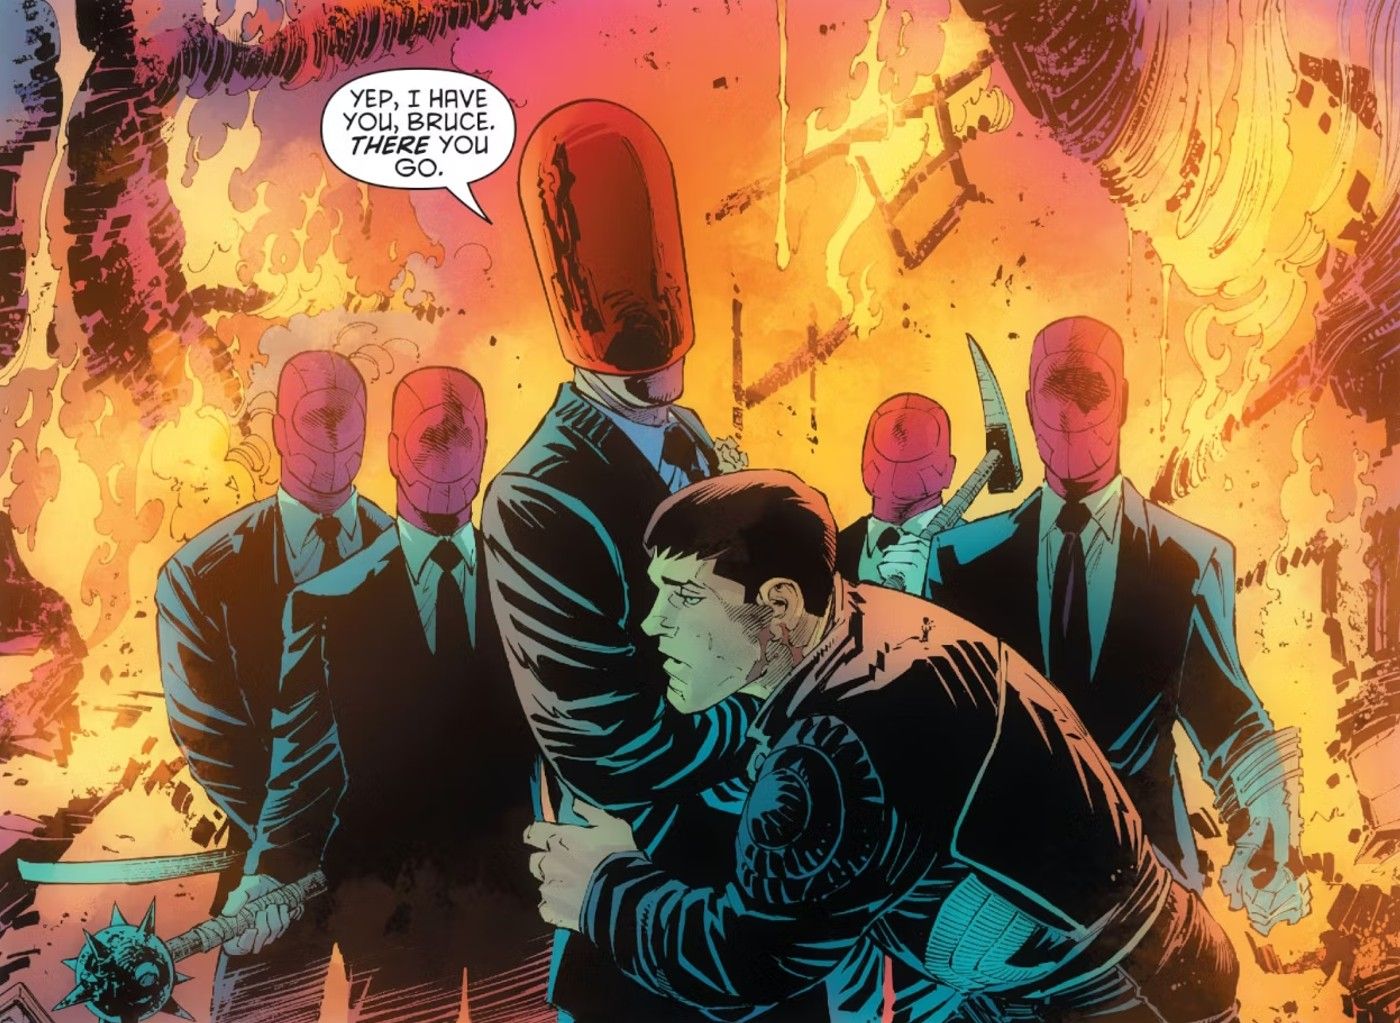 Comic book panel: a gang of men in suits and large red helmets stand in a burning building. The leader hold Bruce Wayne up.